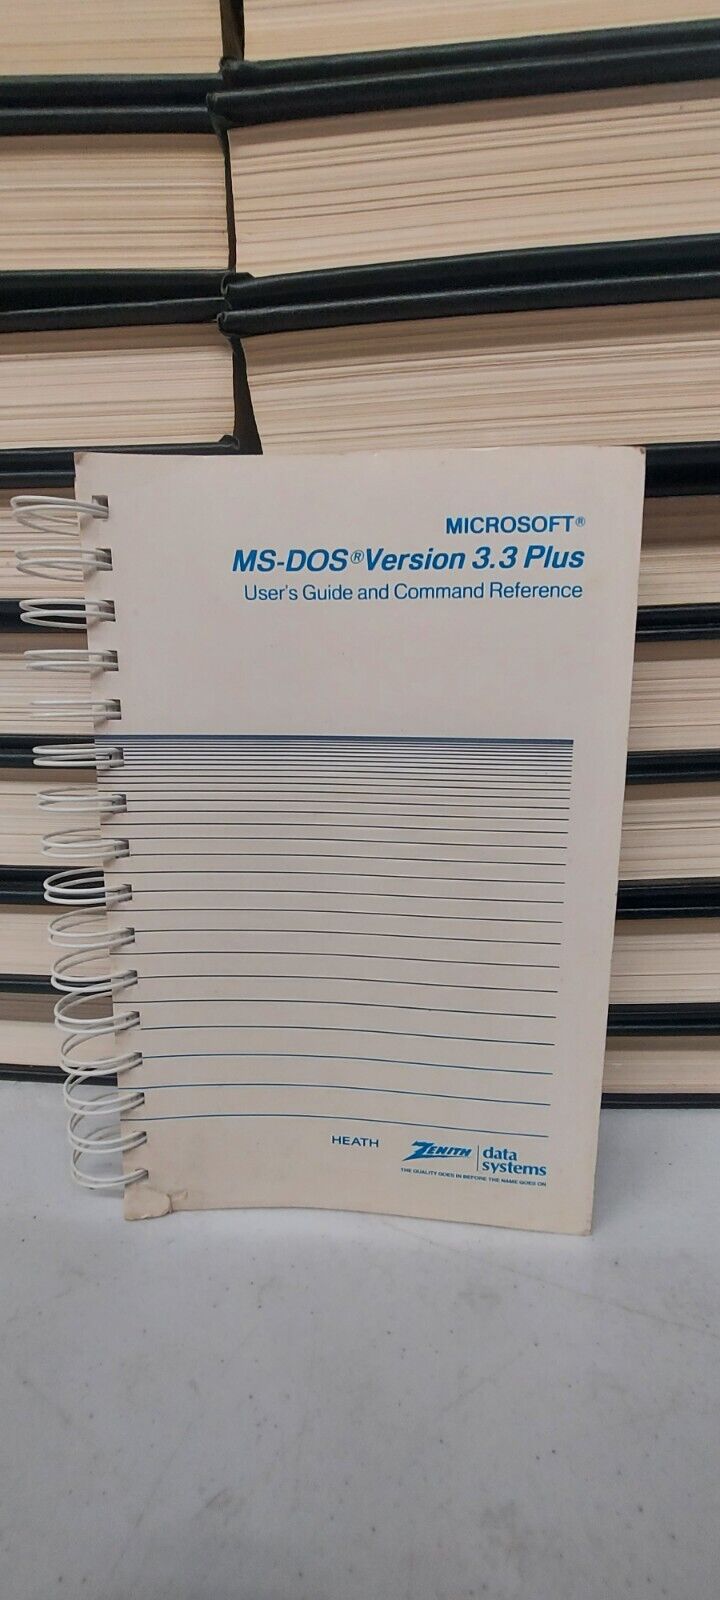 Microsoft MS-DOS Version 3.3 Plus User's Guide And Command Reference